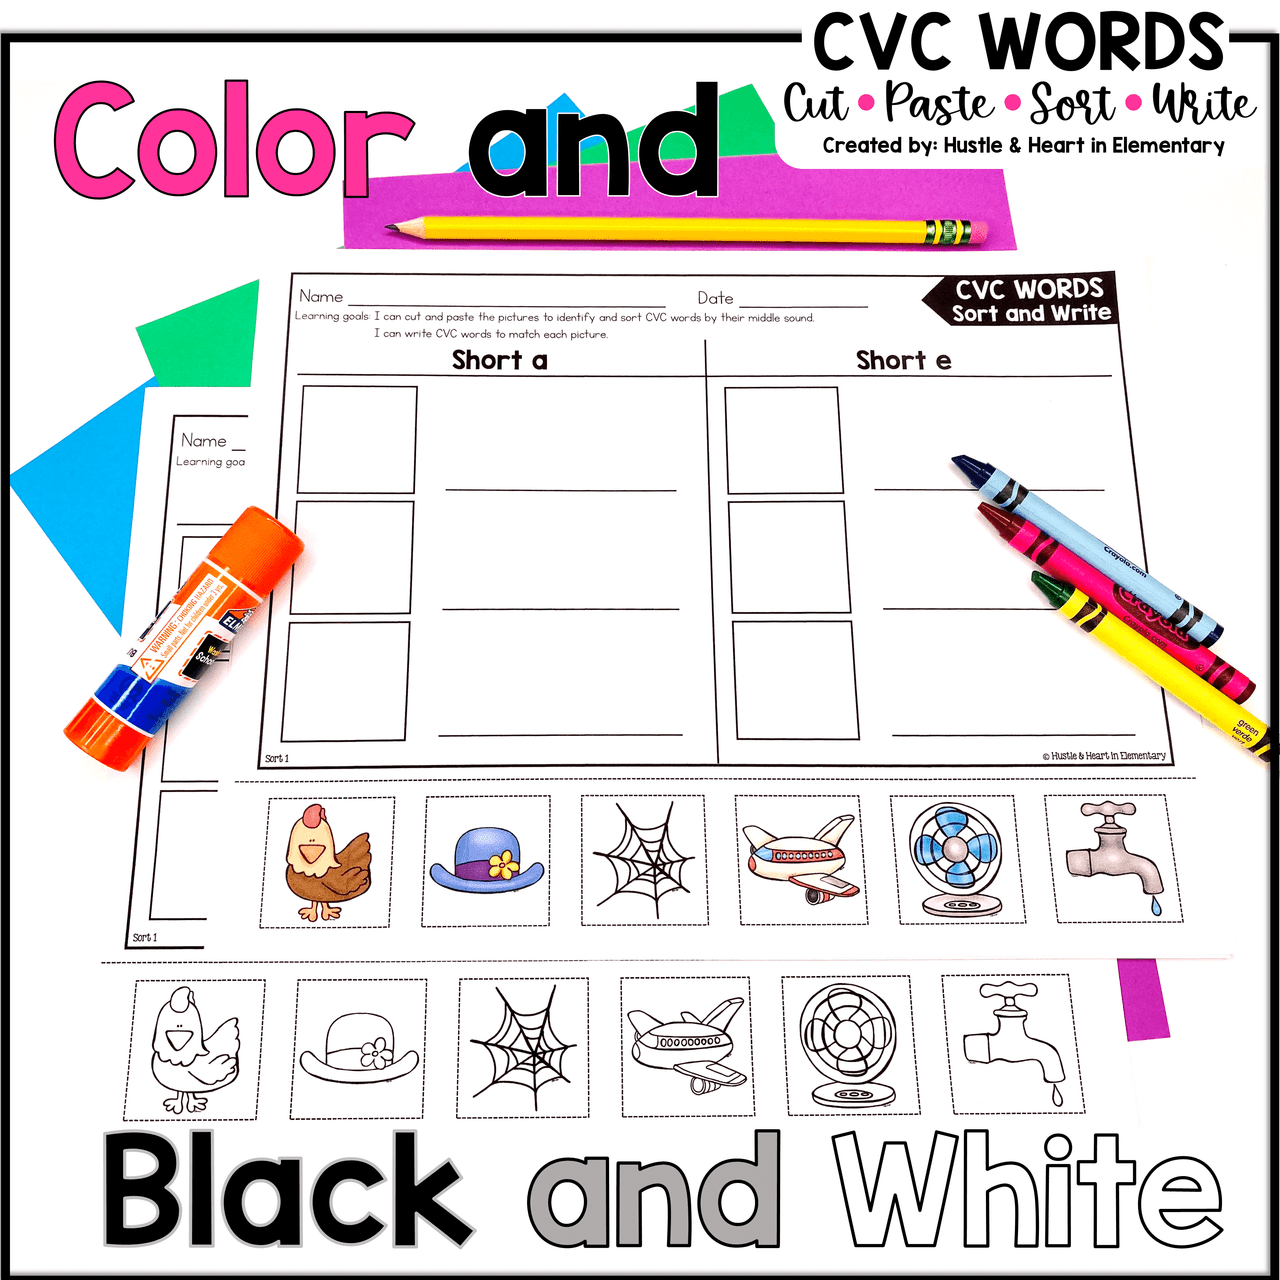 CVC Words Sort and Write | CVC Words Activities | Cut and Paste